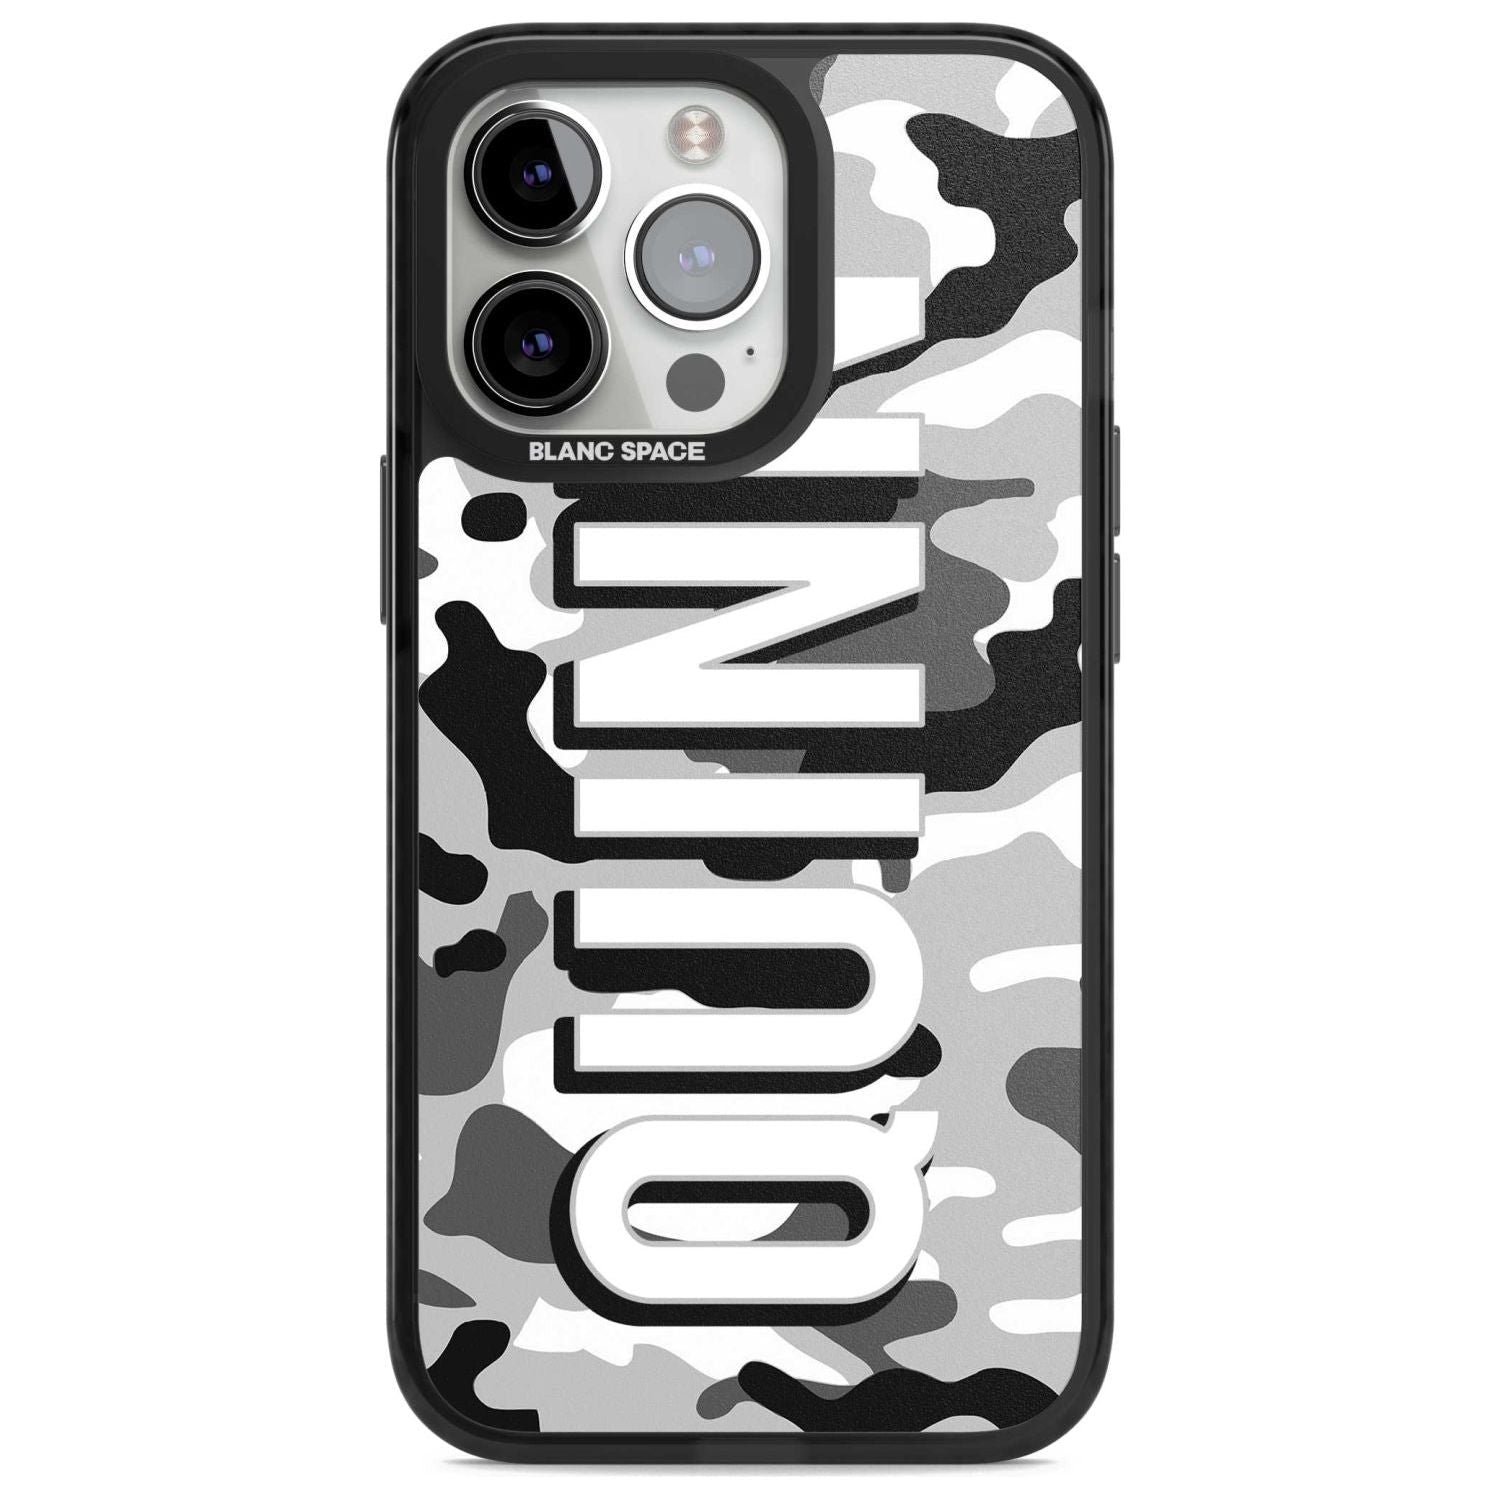 Personalised Greyscale Camo Custom Phone Case iPhone 15 Pro Max / Magsafe Black Impact Case,iPhone 15 Pro / Magsafe Black Impact Case,iPhone 14 Pro Max / Magsafe Black Impact Case,iPhone 14 Pro / Magsafe Black Impact Case,iPhone 13 Pro / Magsafe Black Impact Case Blanc Space